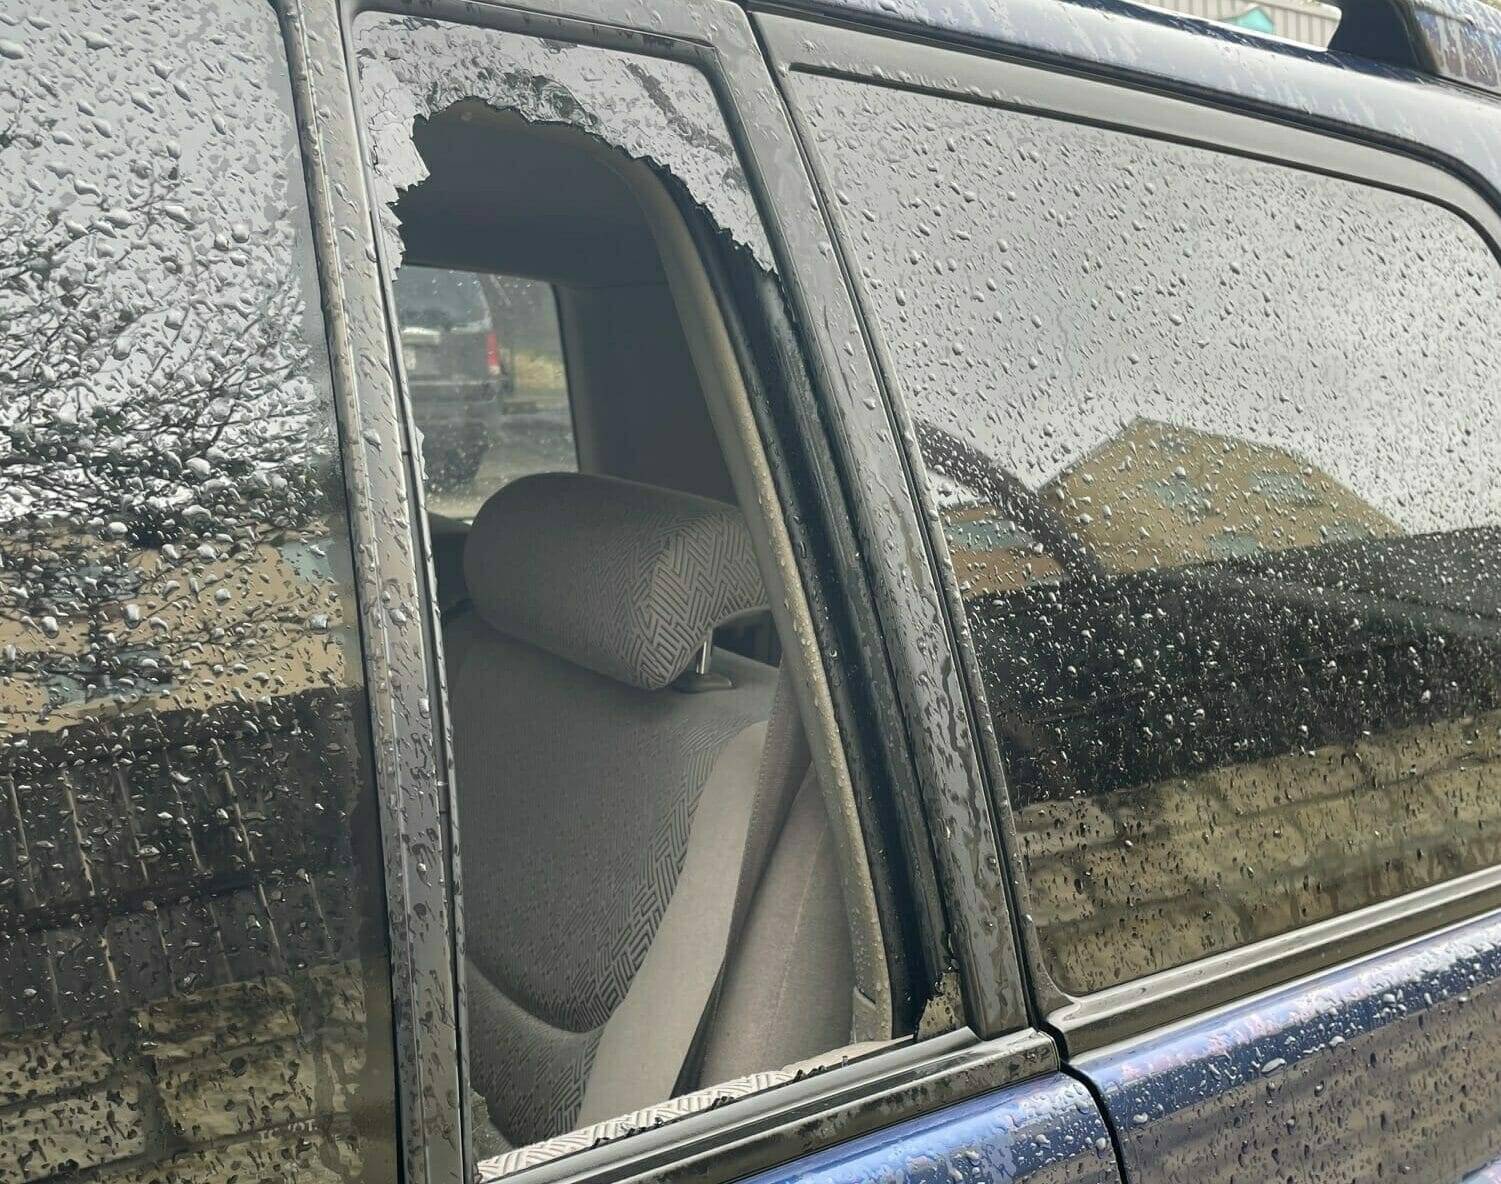 This image features a 2015 Nissan Pathfinder SUV situated in Helotes, Texas. The left rear driver's side vent glass has been severely damaged as a result of a robbery, necessitating a complete replacement. Originally, the quarter glass had factory privacy tint. The vehicle is scheduled for a home auto glass replacement appointment to restore its integrity and privacy.